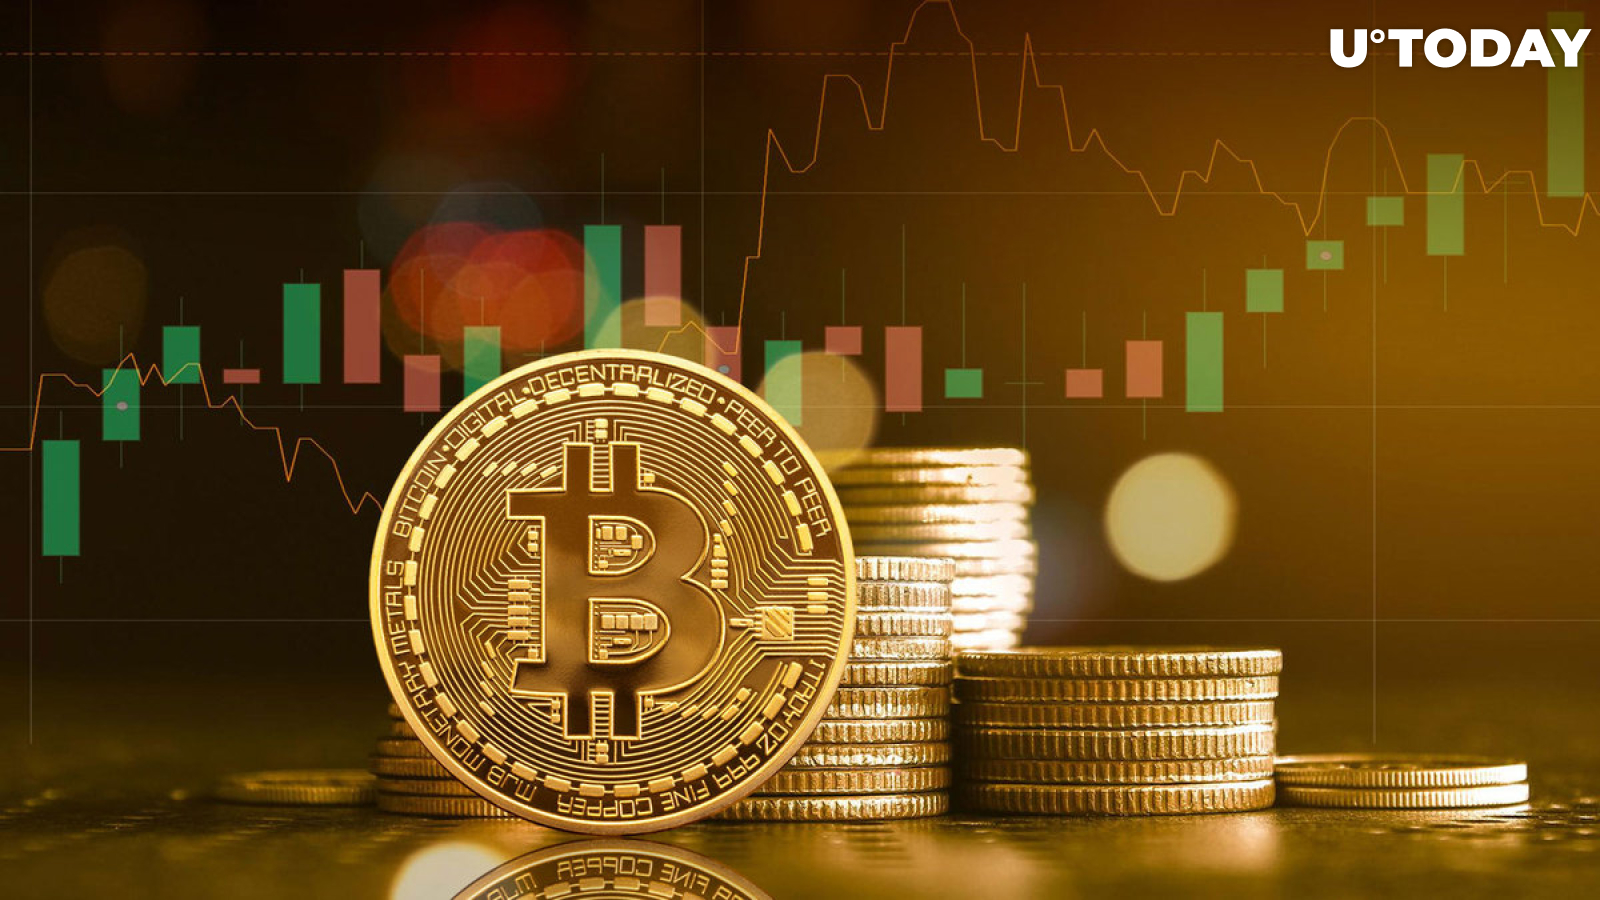 Bitcoin (BTC) Price Rally Launched by This Group of Investors